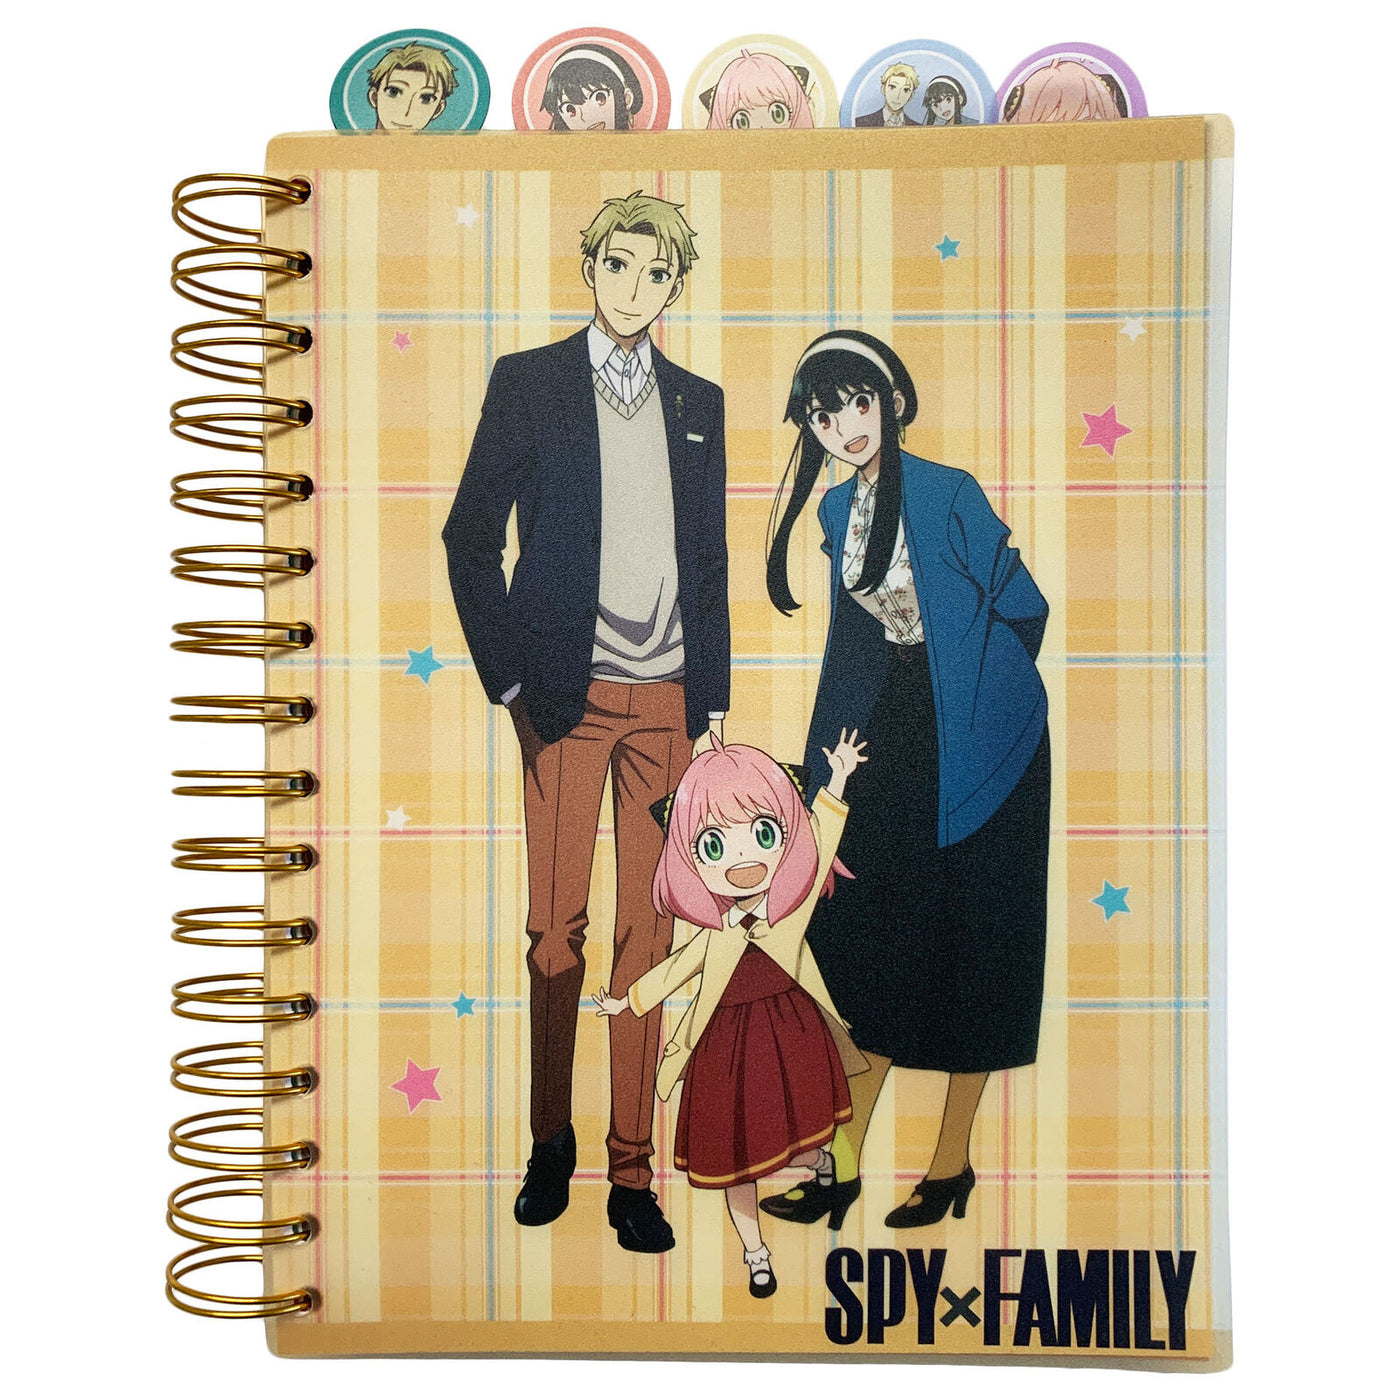 SPY X FAMILY - CHARACTER GROUP #2 TABBED NOTEBOOK